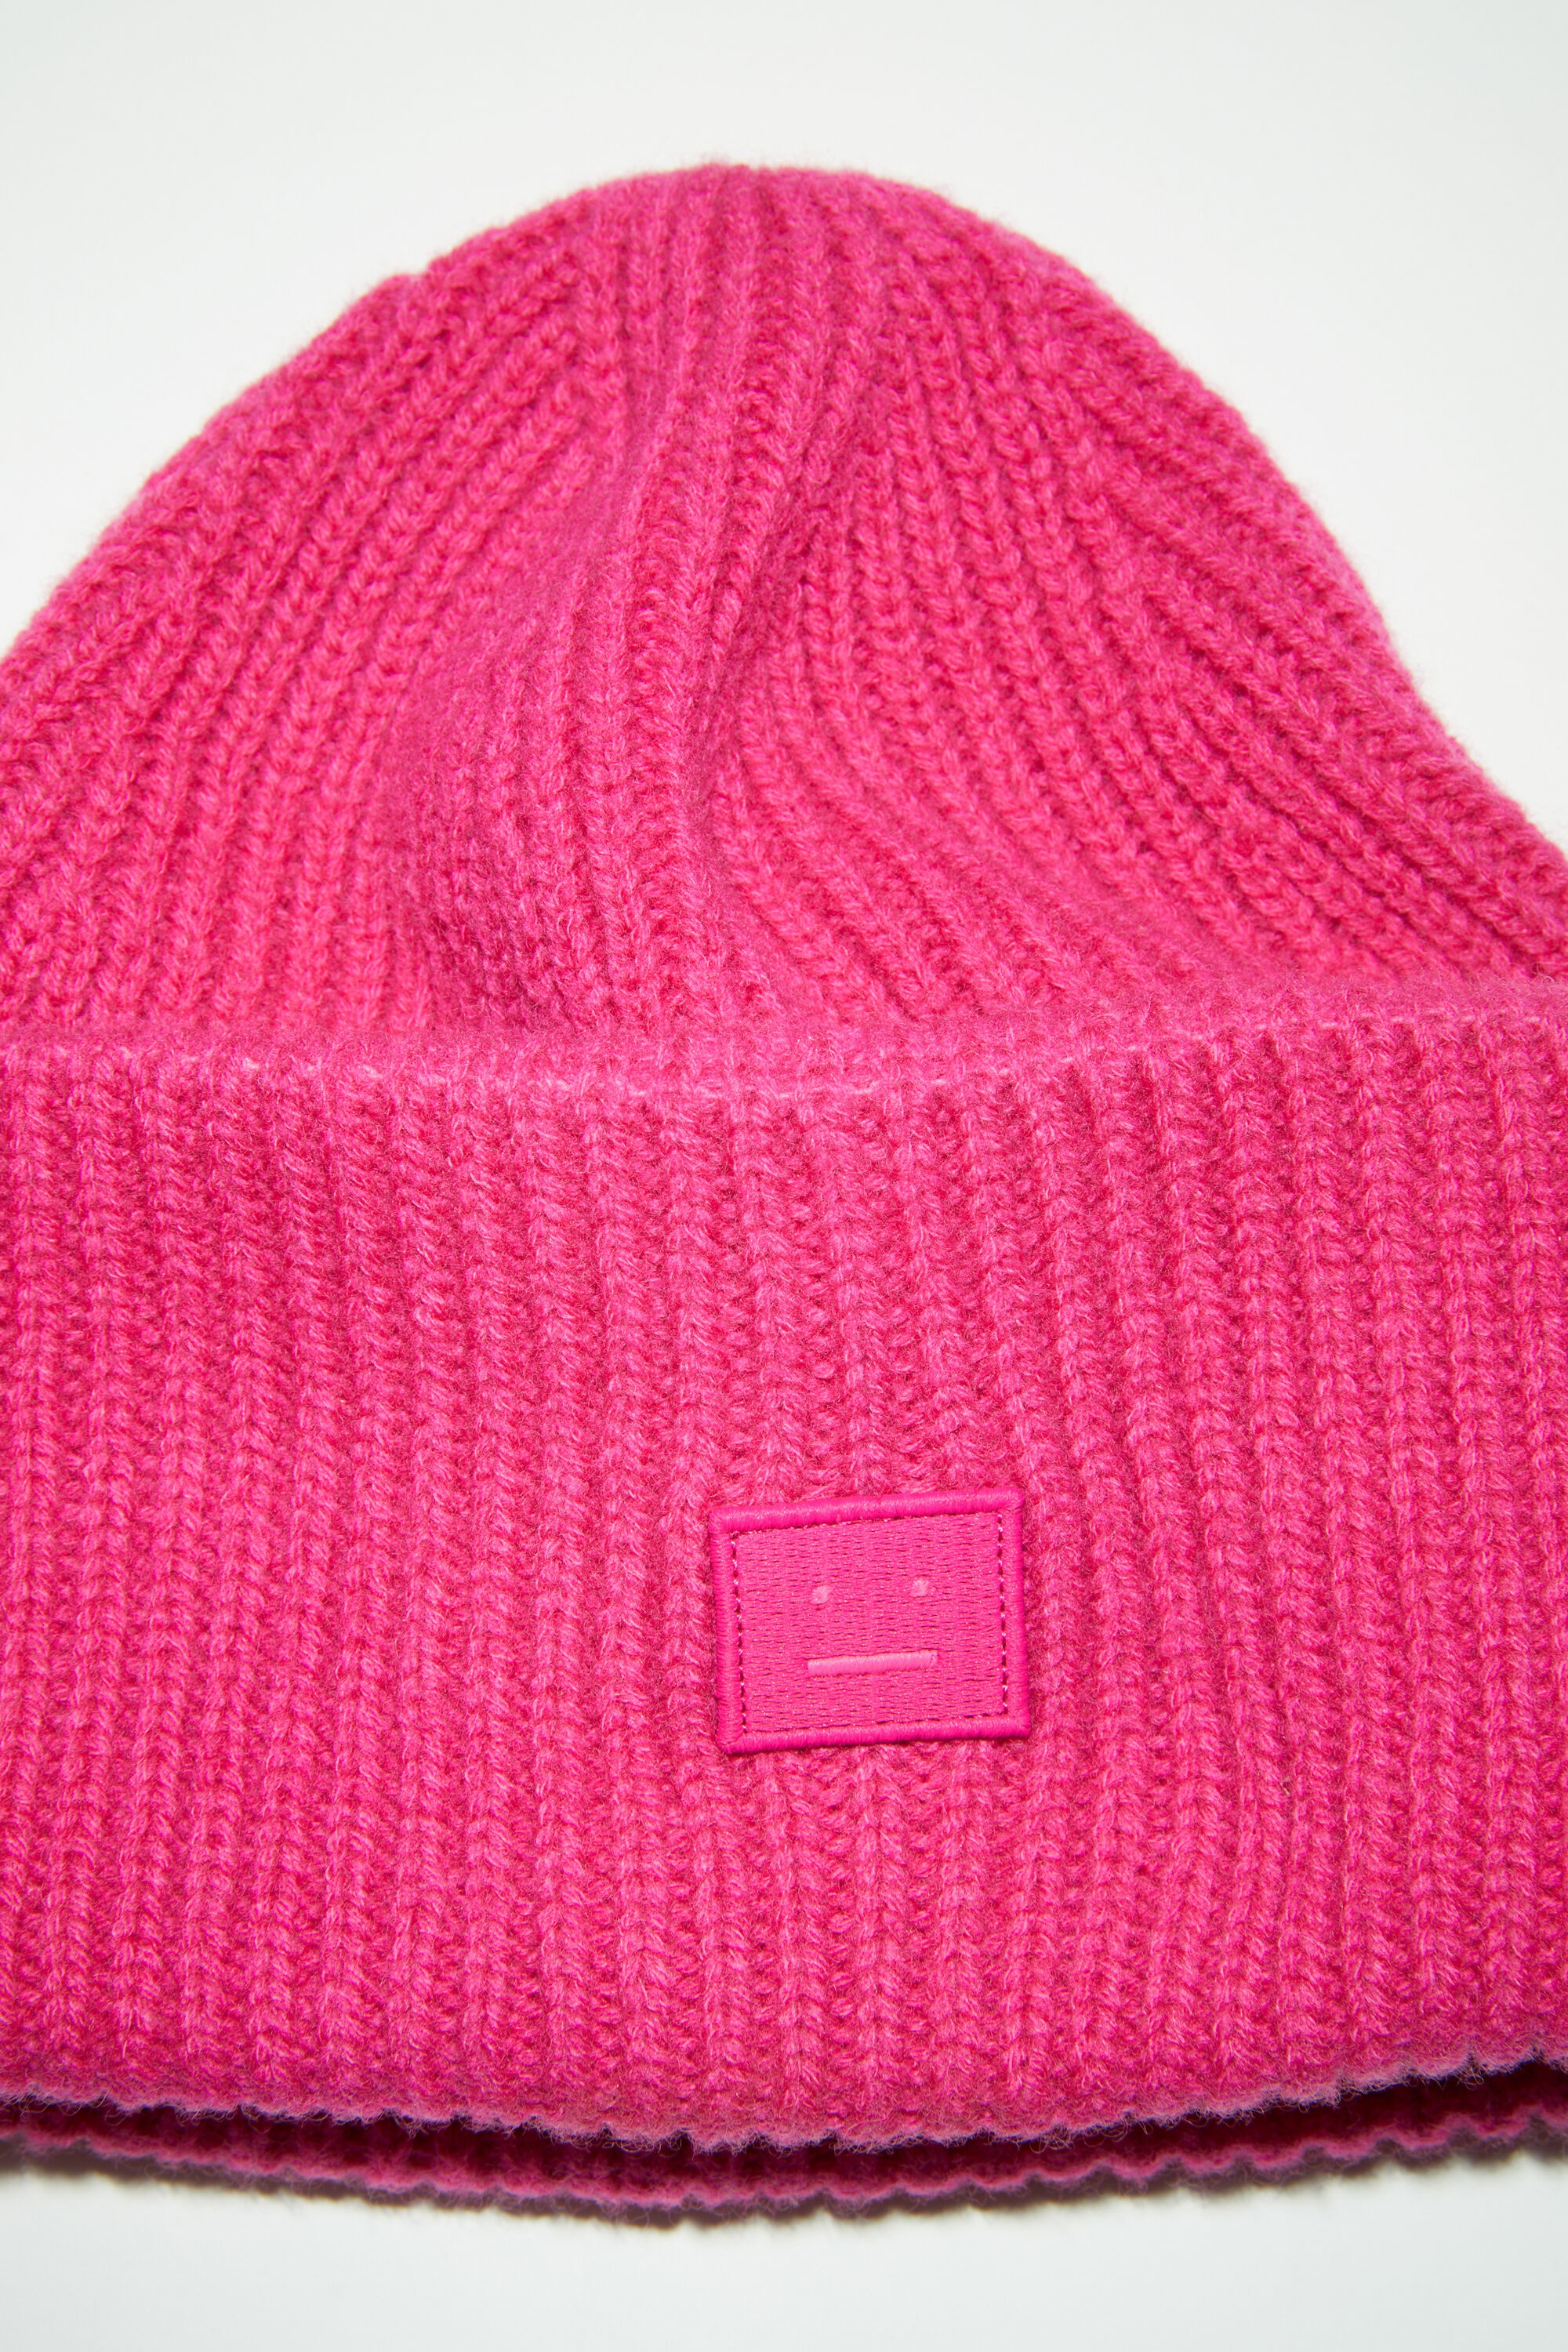 Small face logo beanie - Bright pink - 4